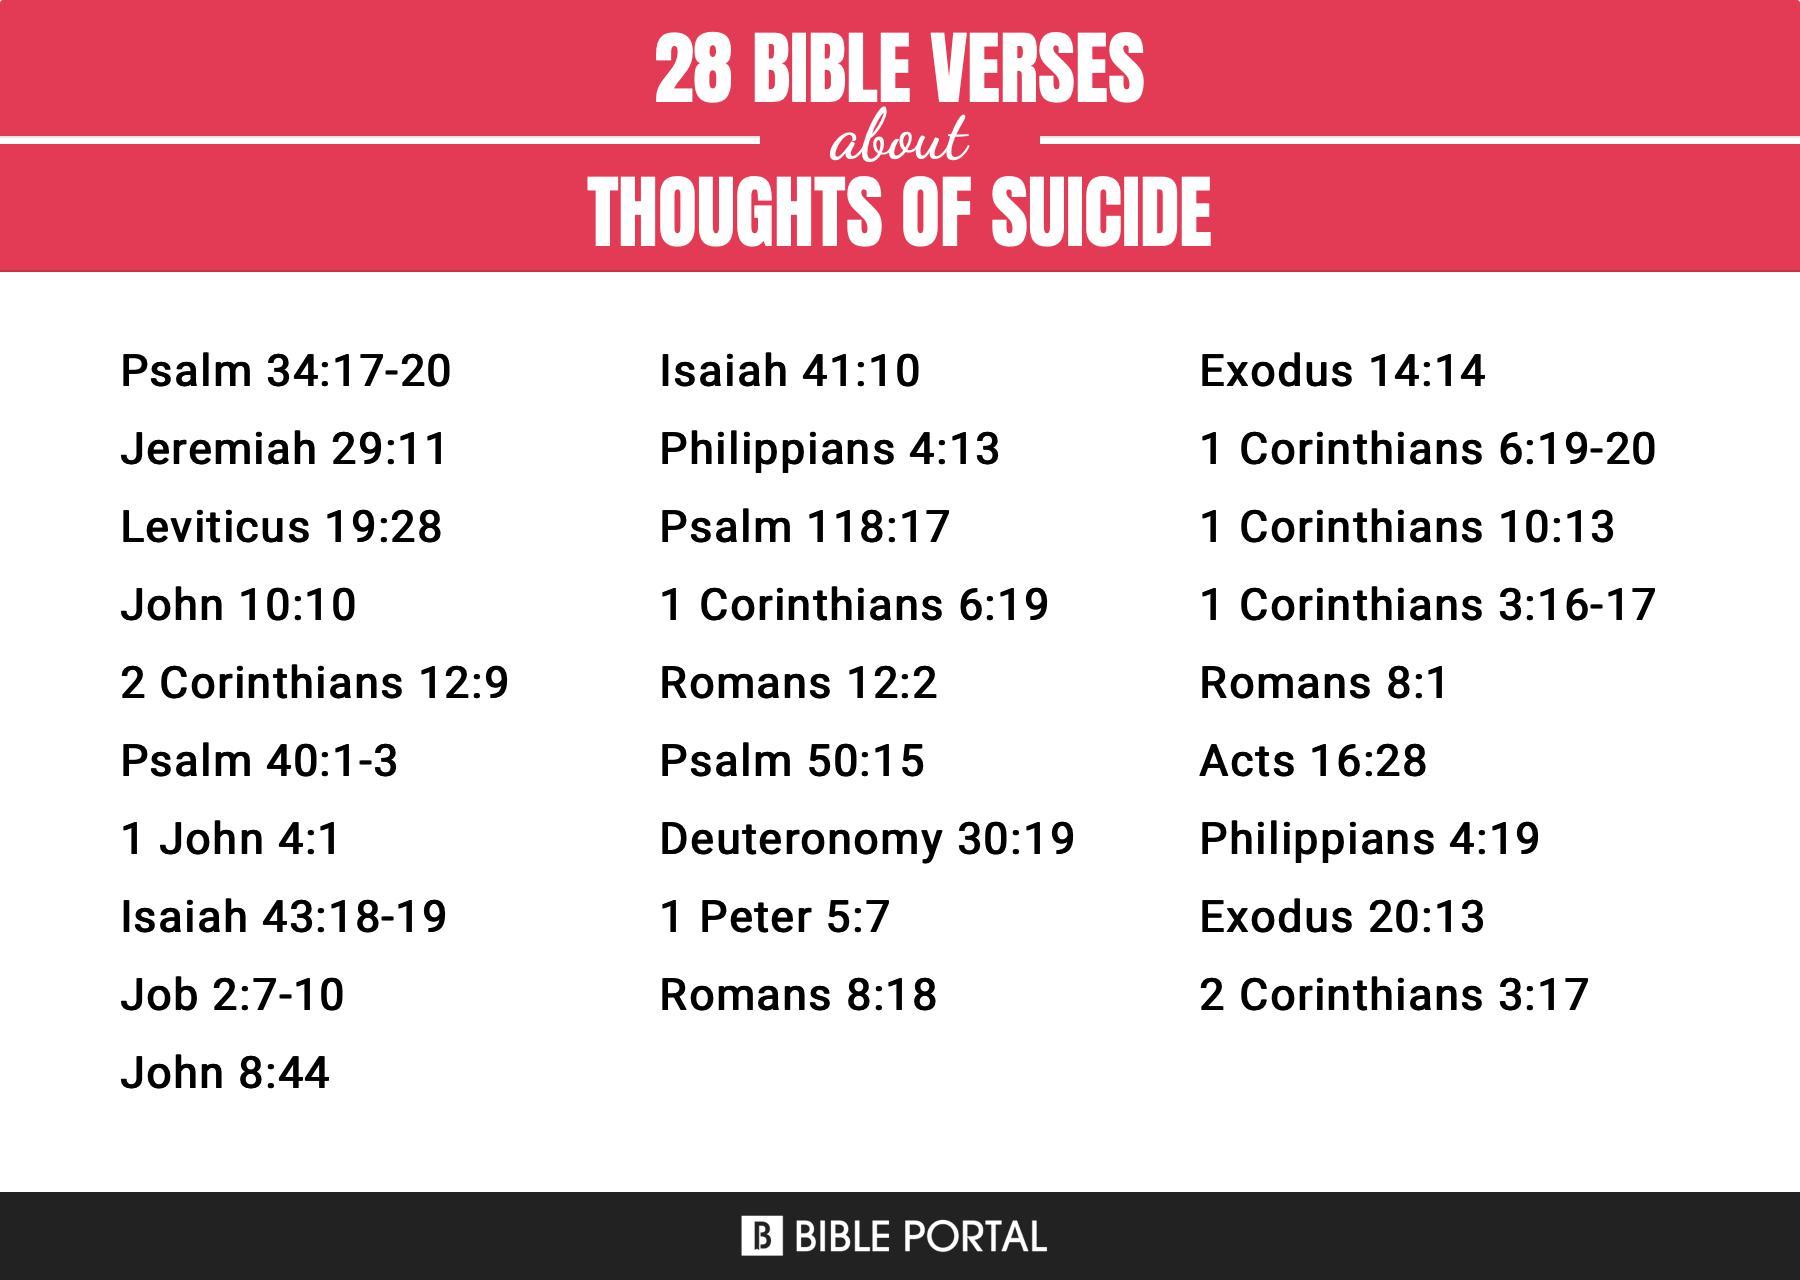 What Does the Bible Say about Thoughts Of Suicide?